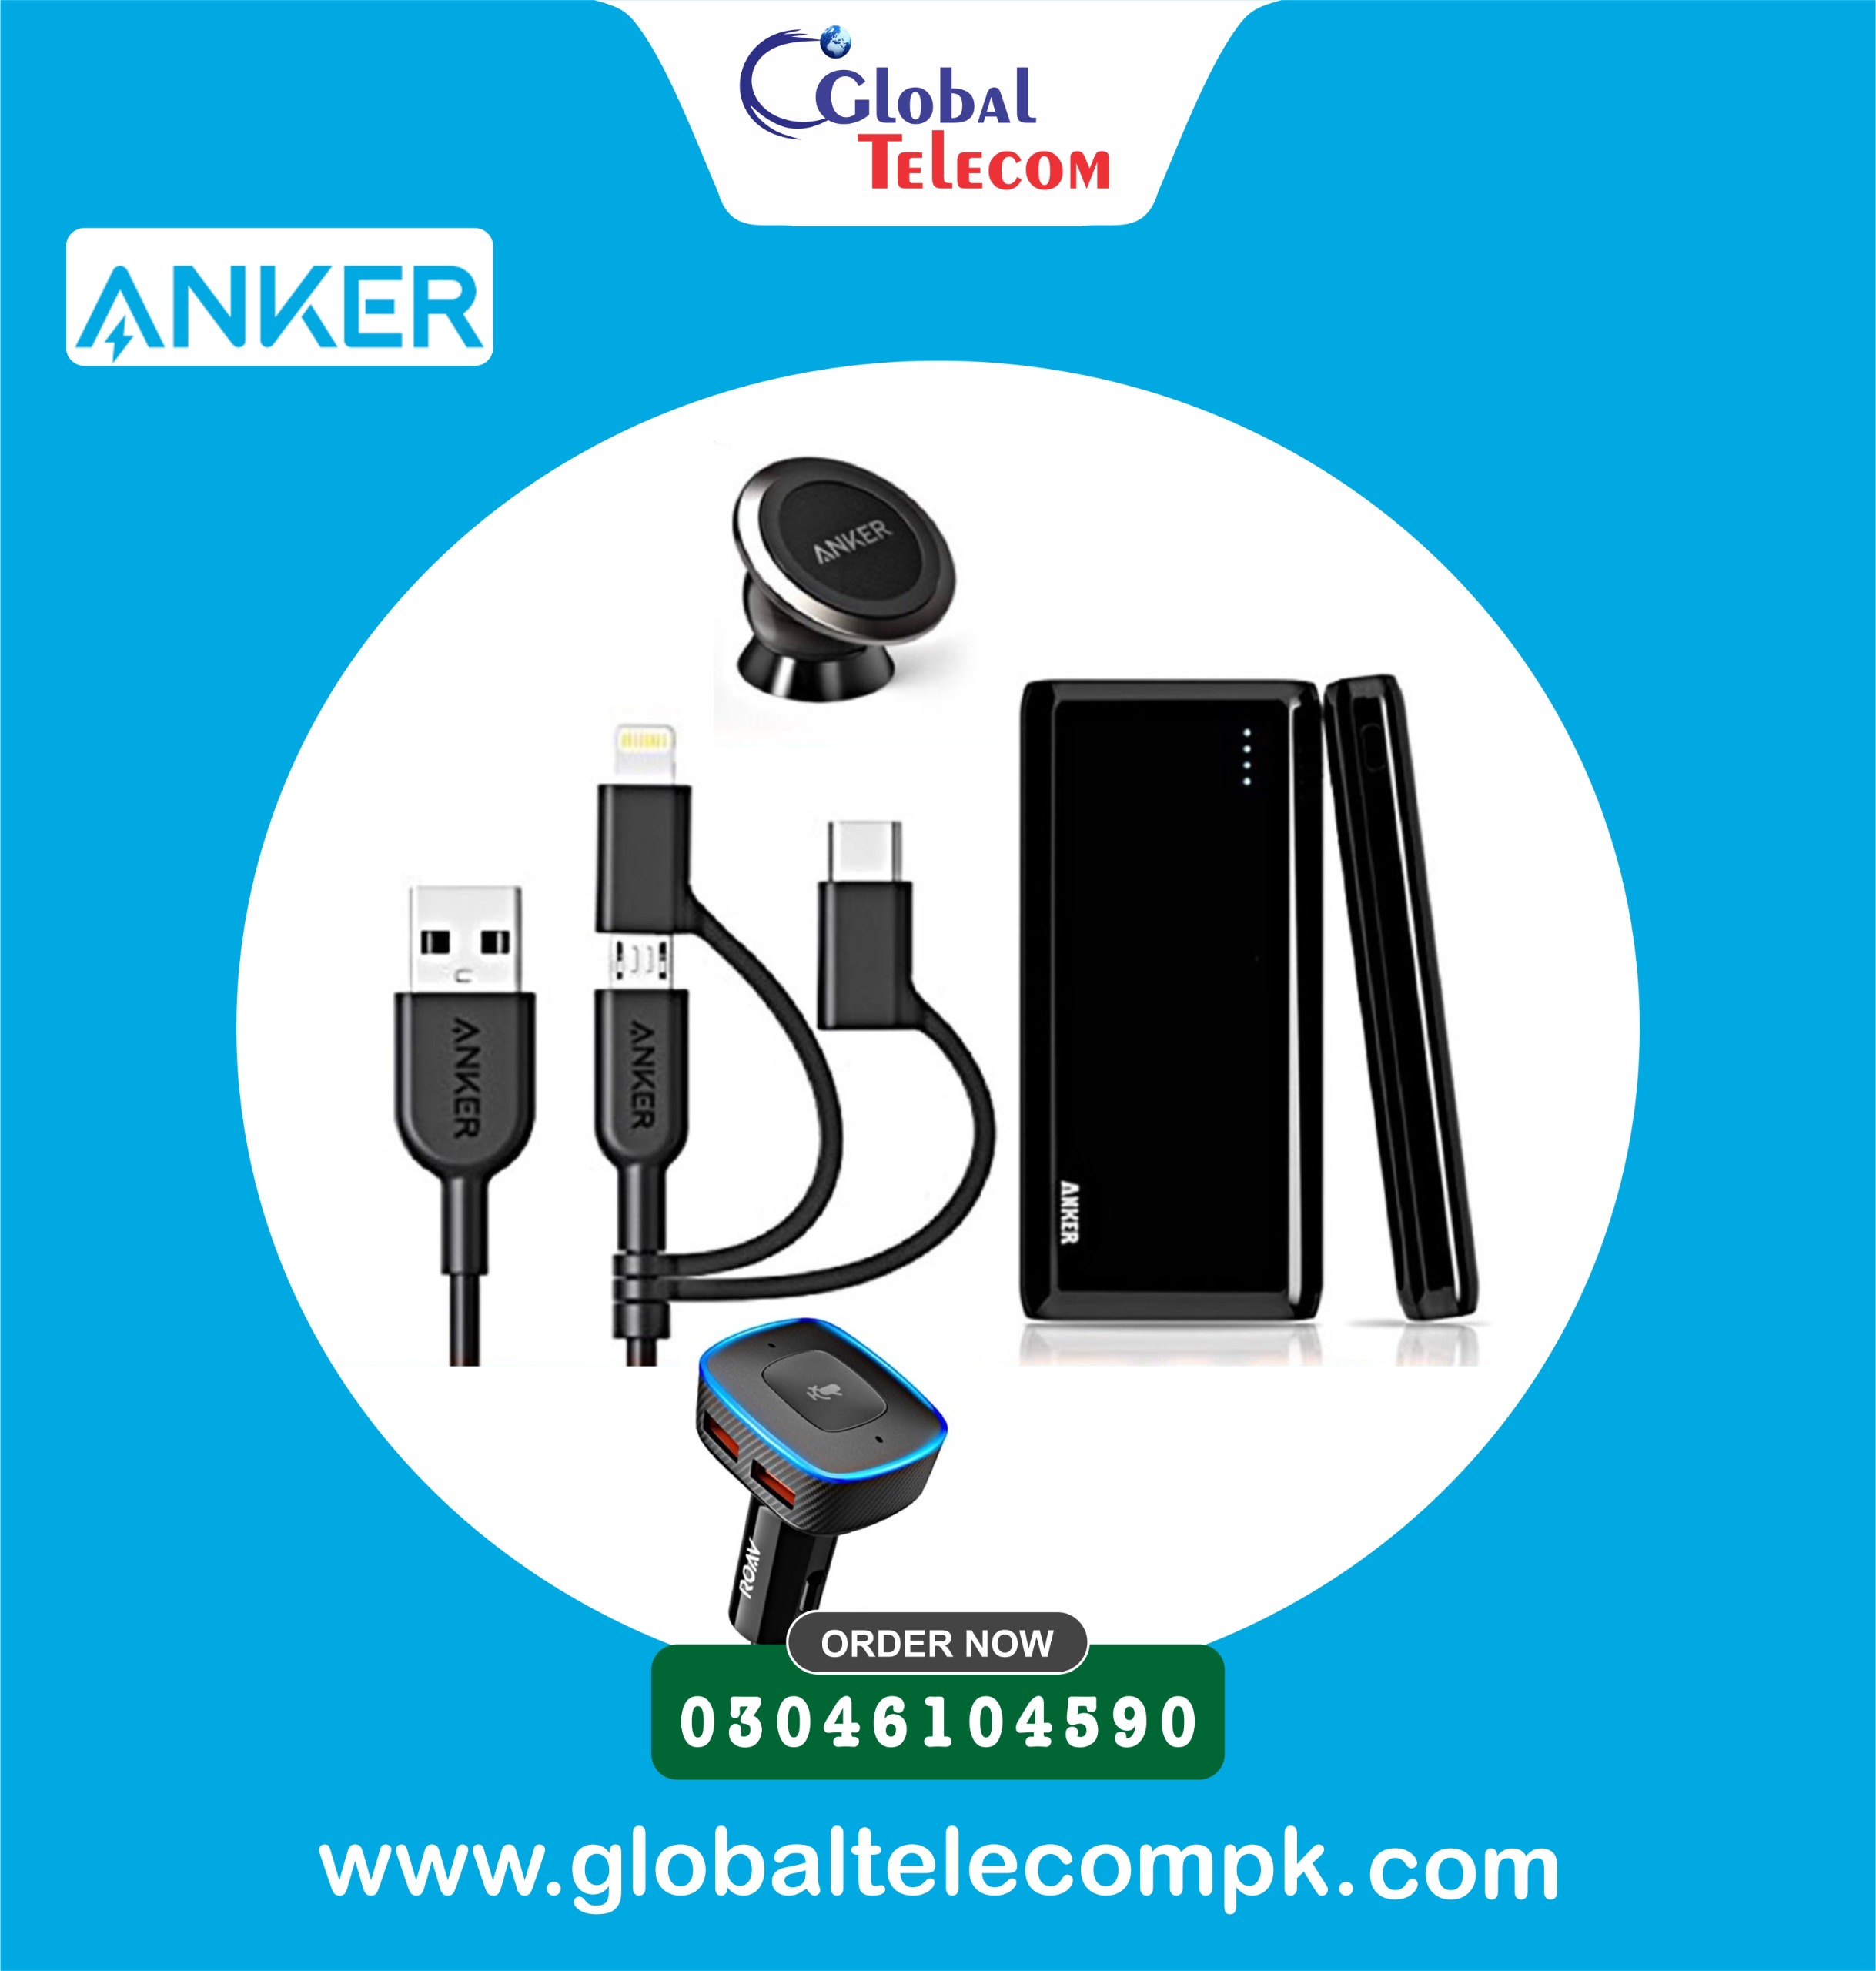 Anker Accessories Prices in pakistan